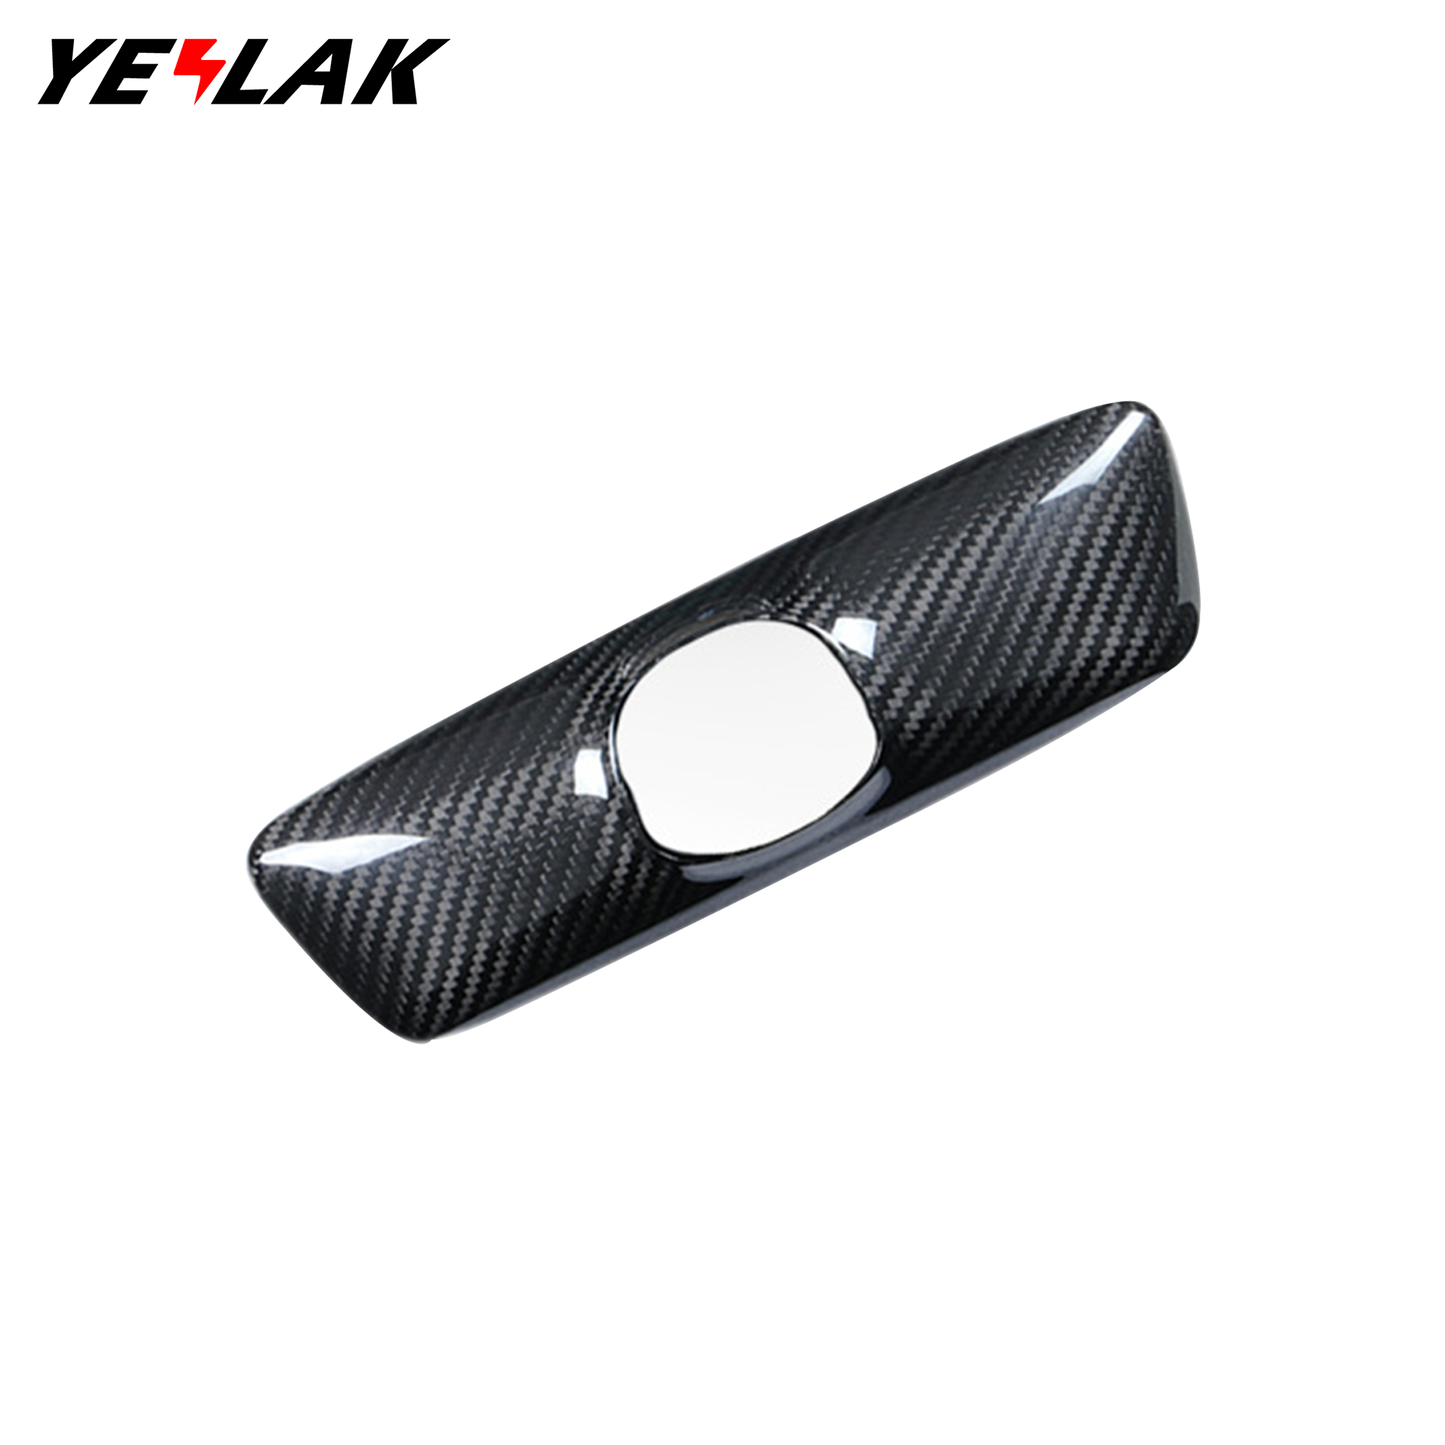 Real Carbon Fiber Rearview Mirror Cover For Tesla Model 3/Y